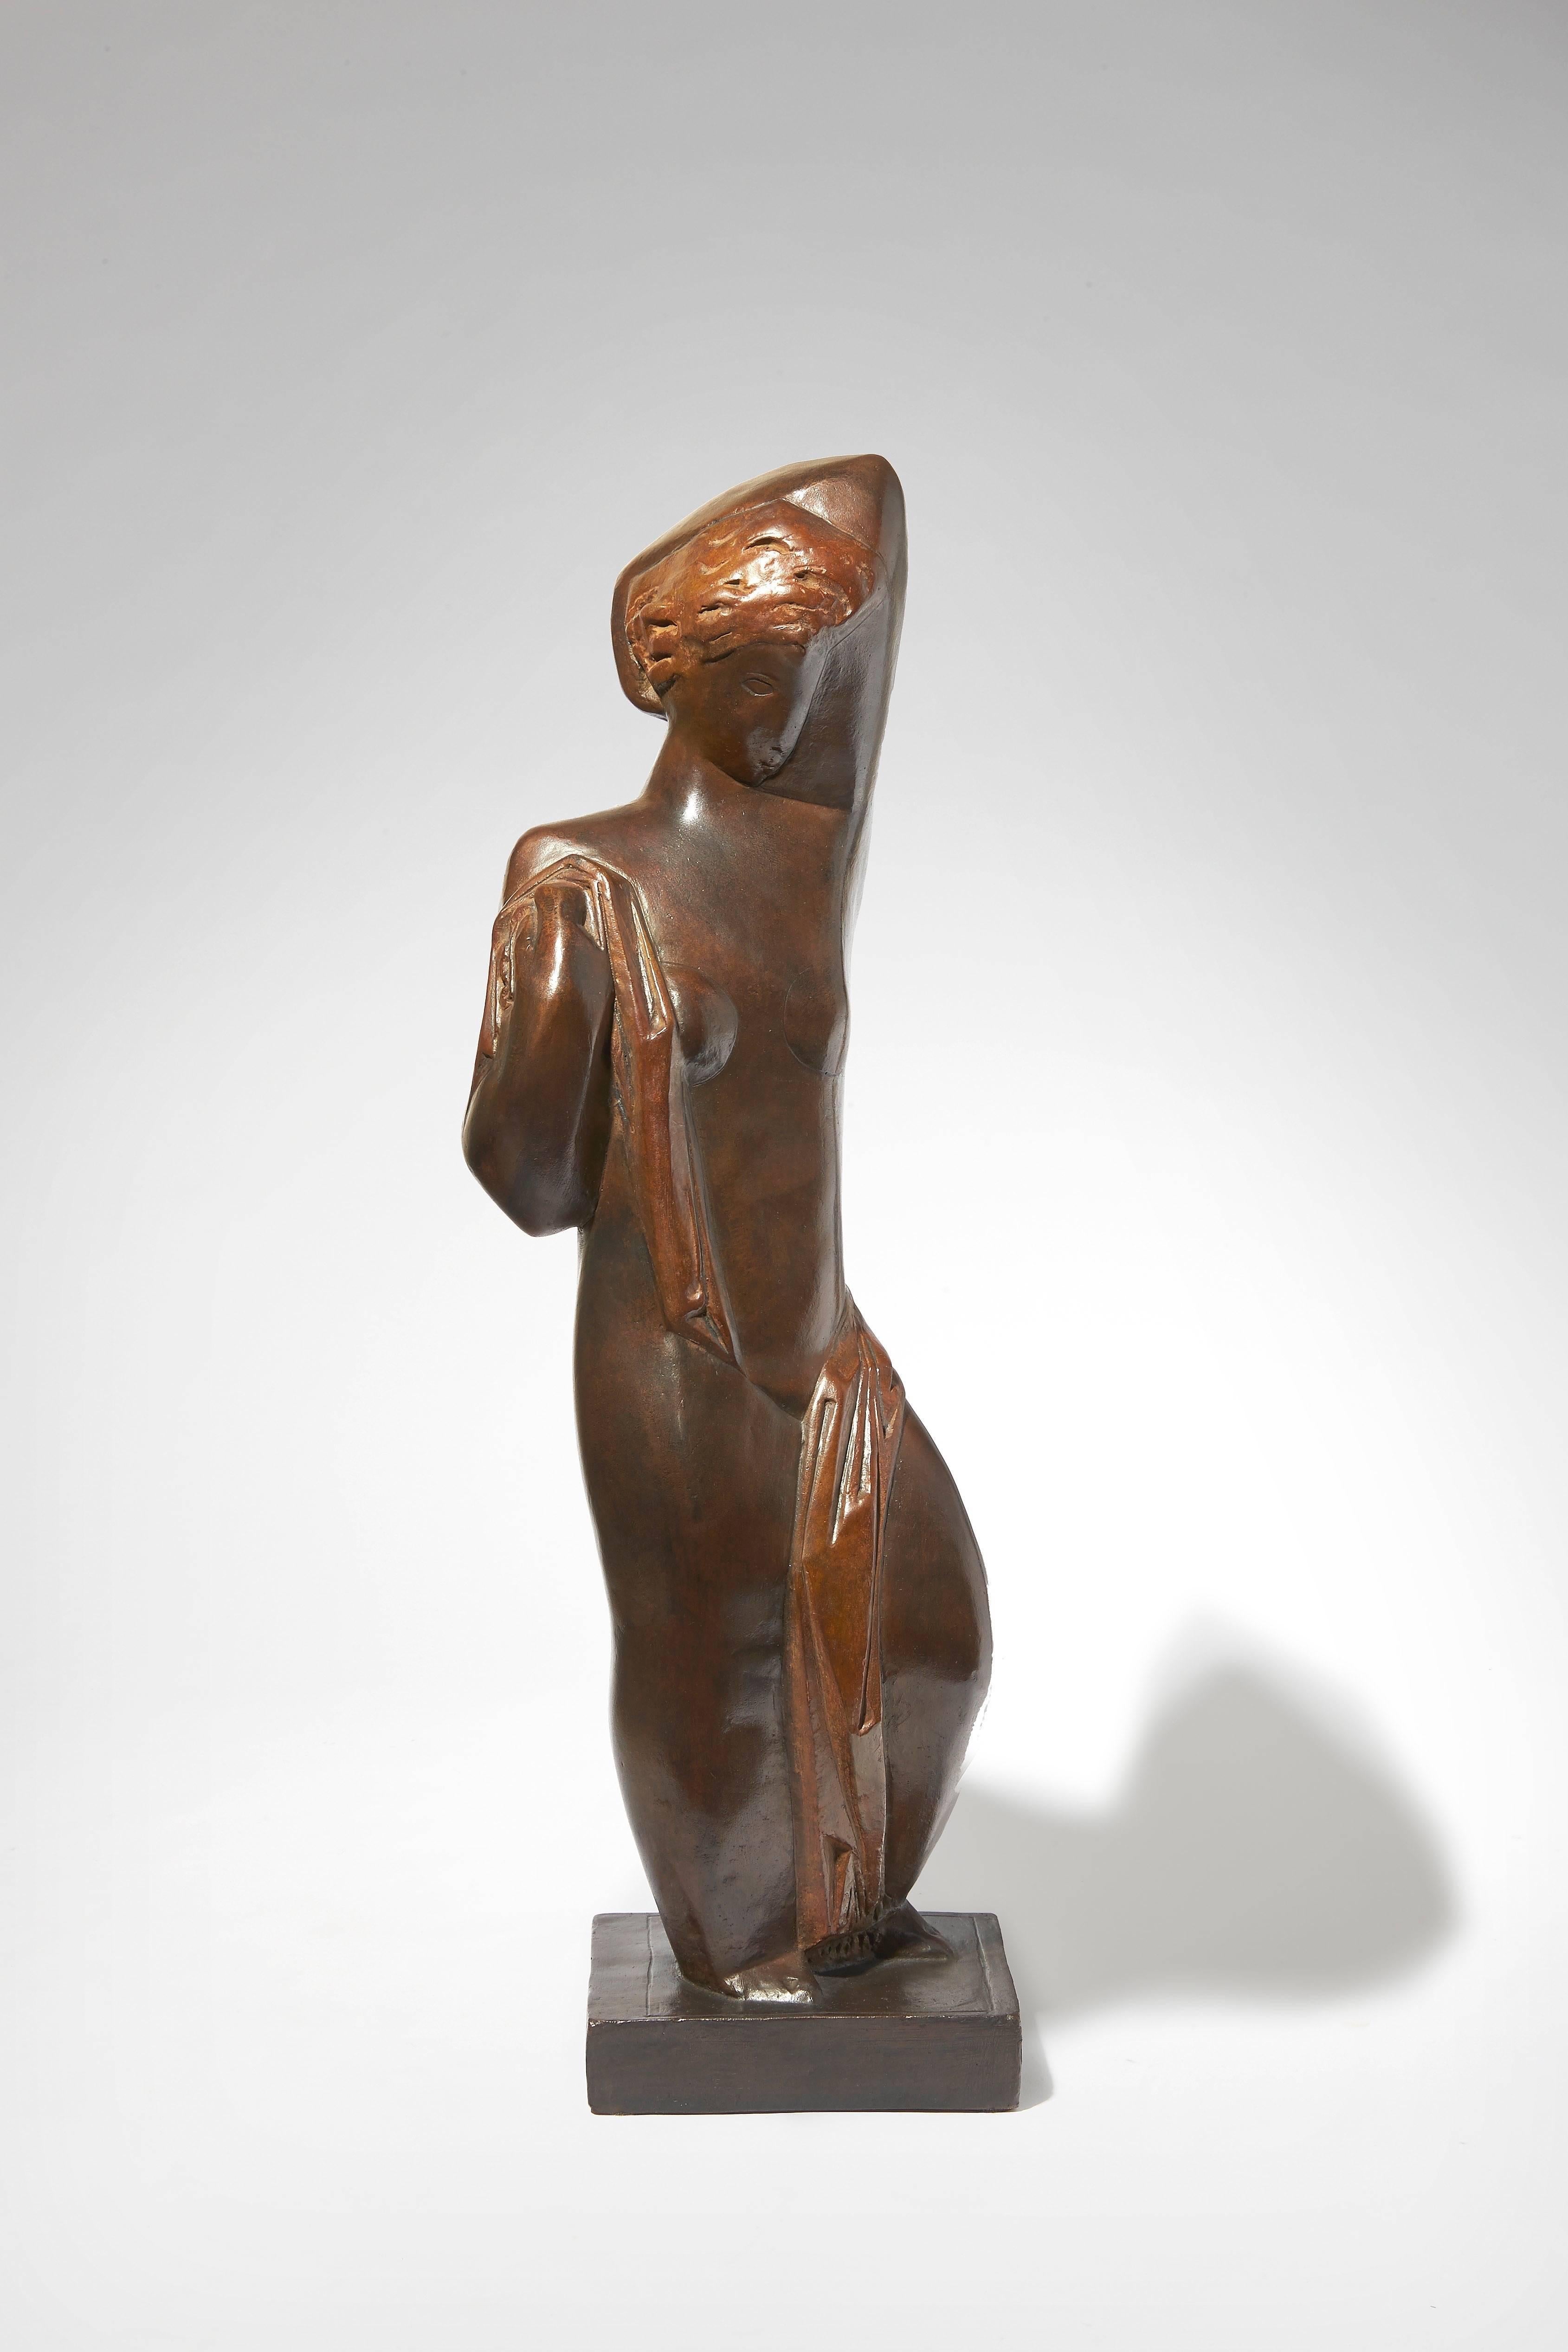 Sculpture in bronze with brown-red patina.
Signed and numbered 7/8. Stamped with the foundry stamp Blanchet and marked AC (Atelier Csaky).
The model from 1928, the present cast is a postmortem edition from Blanchet foundry.